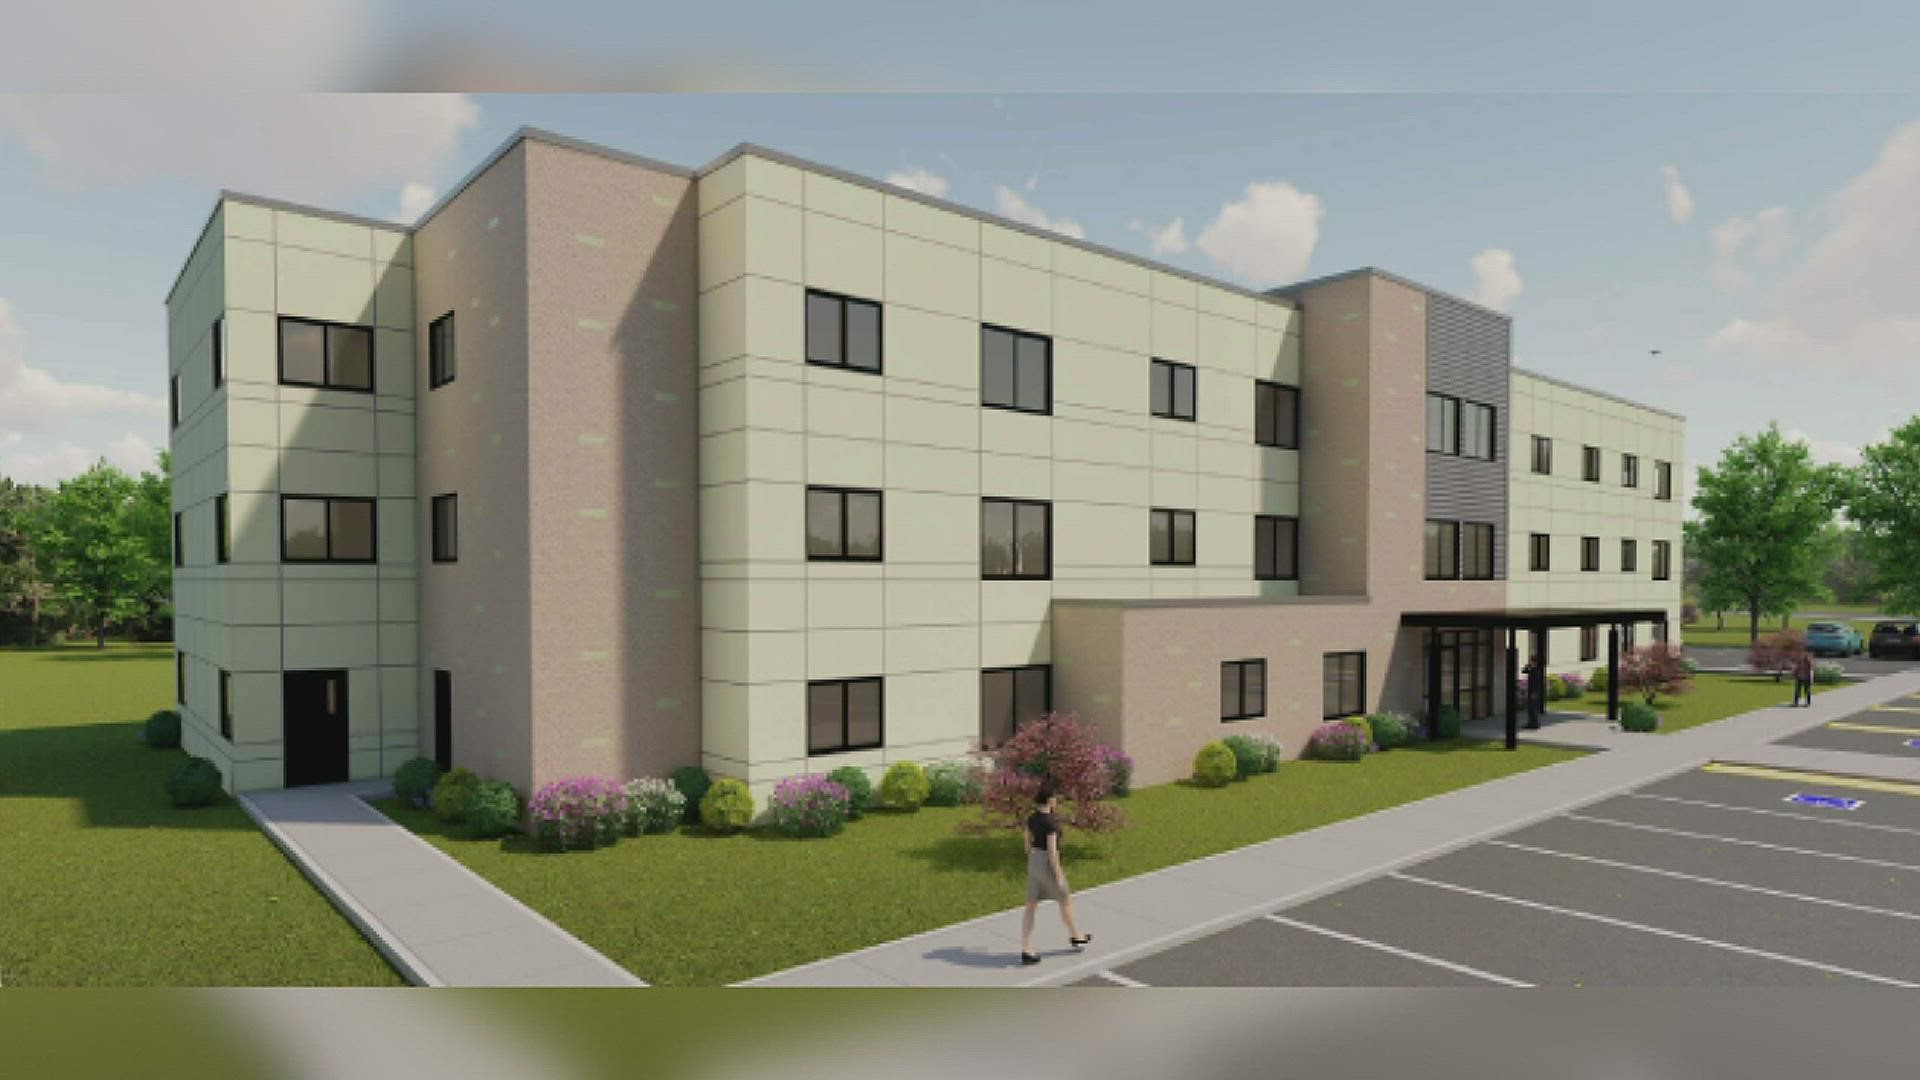 Apoyo Village would be a 24-unit multifamily development located near the Silvis DMV on 5th Street.